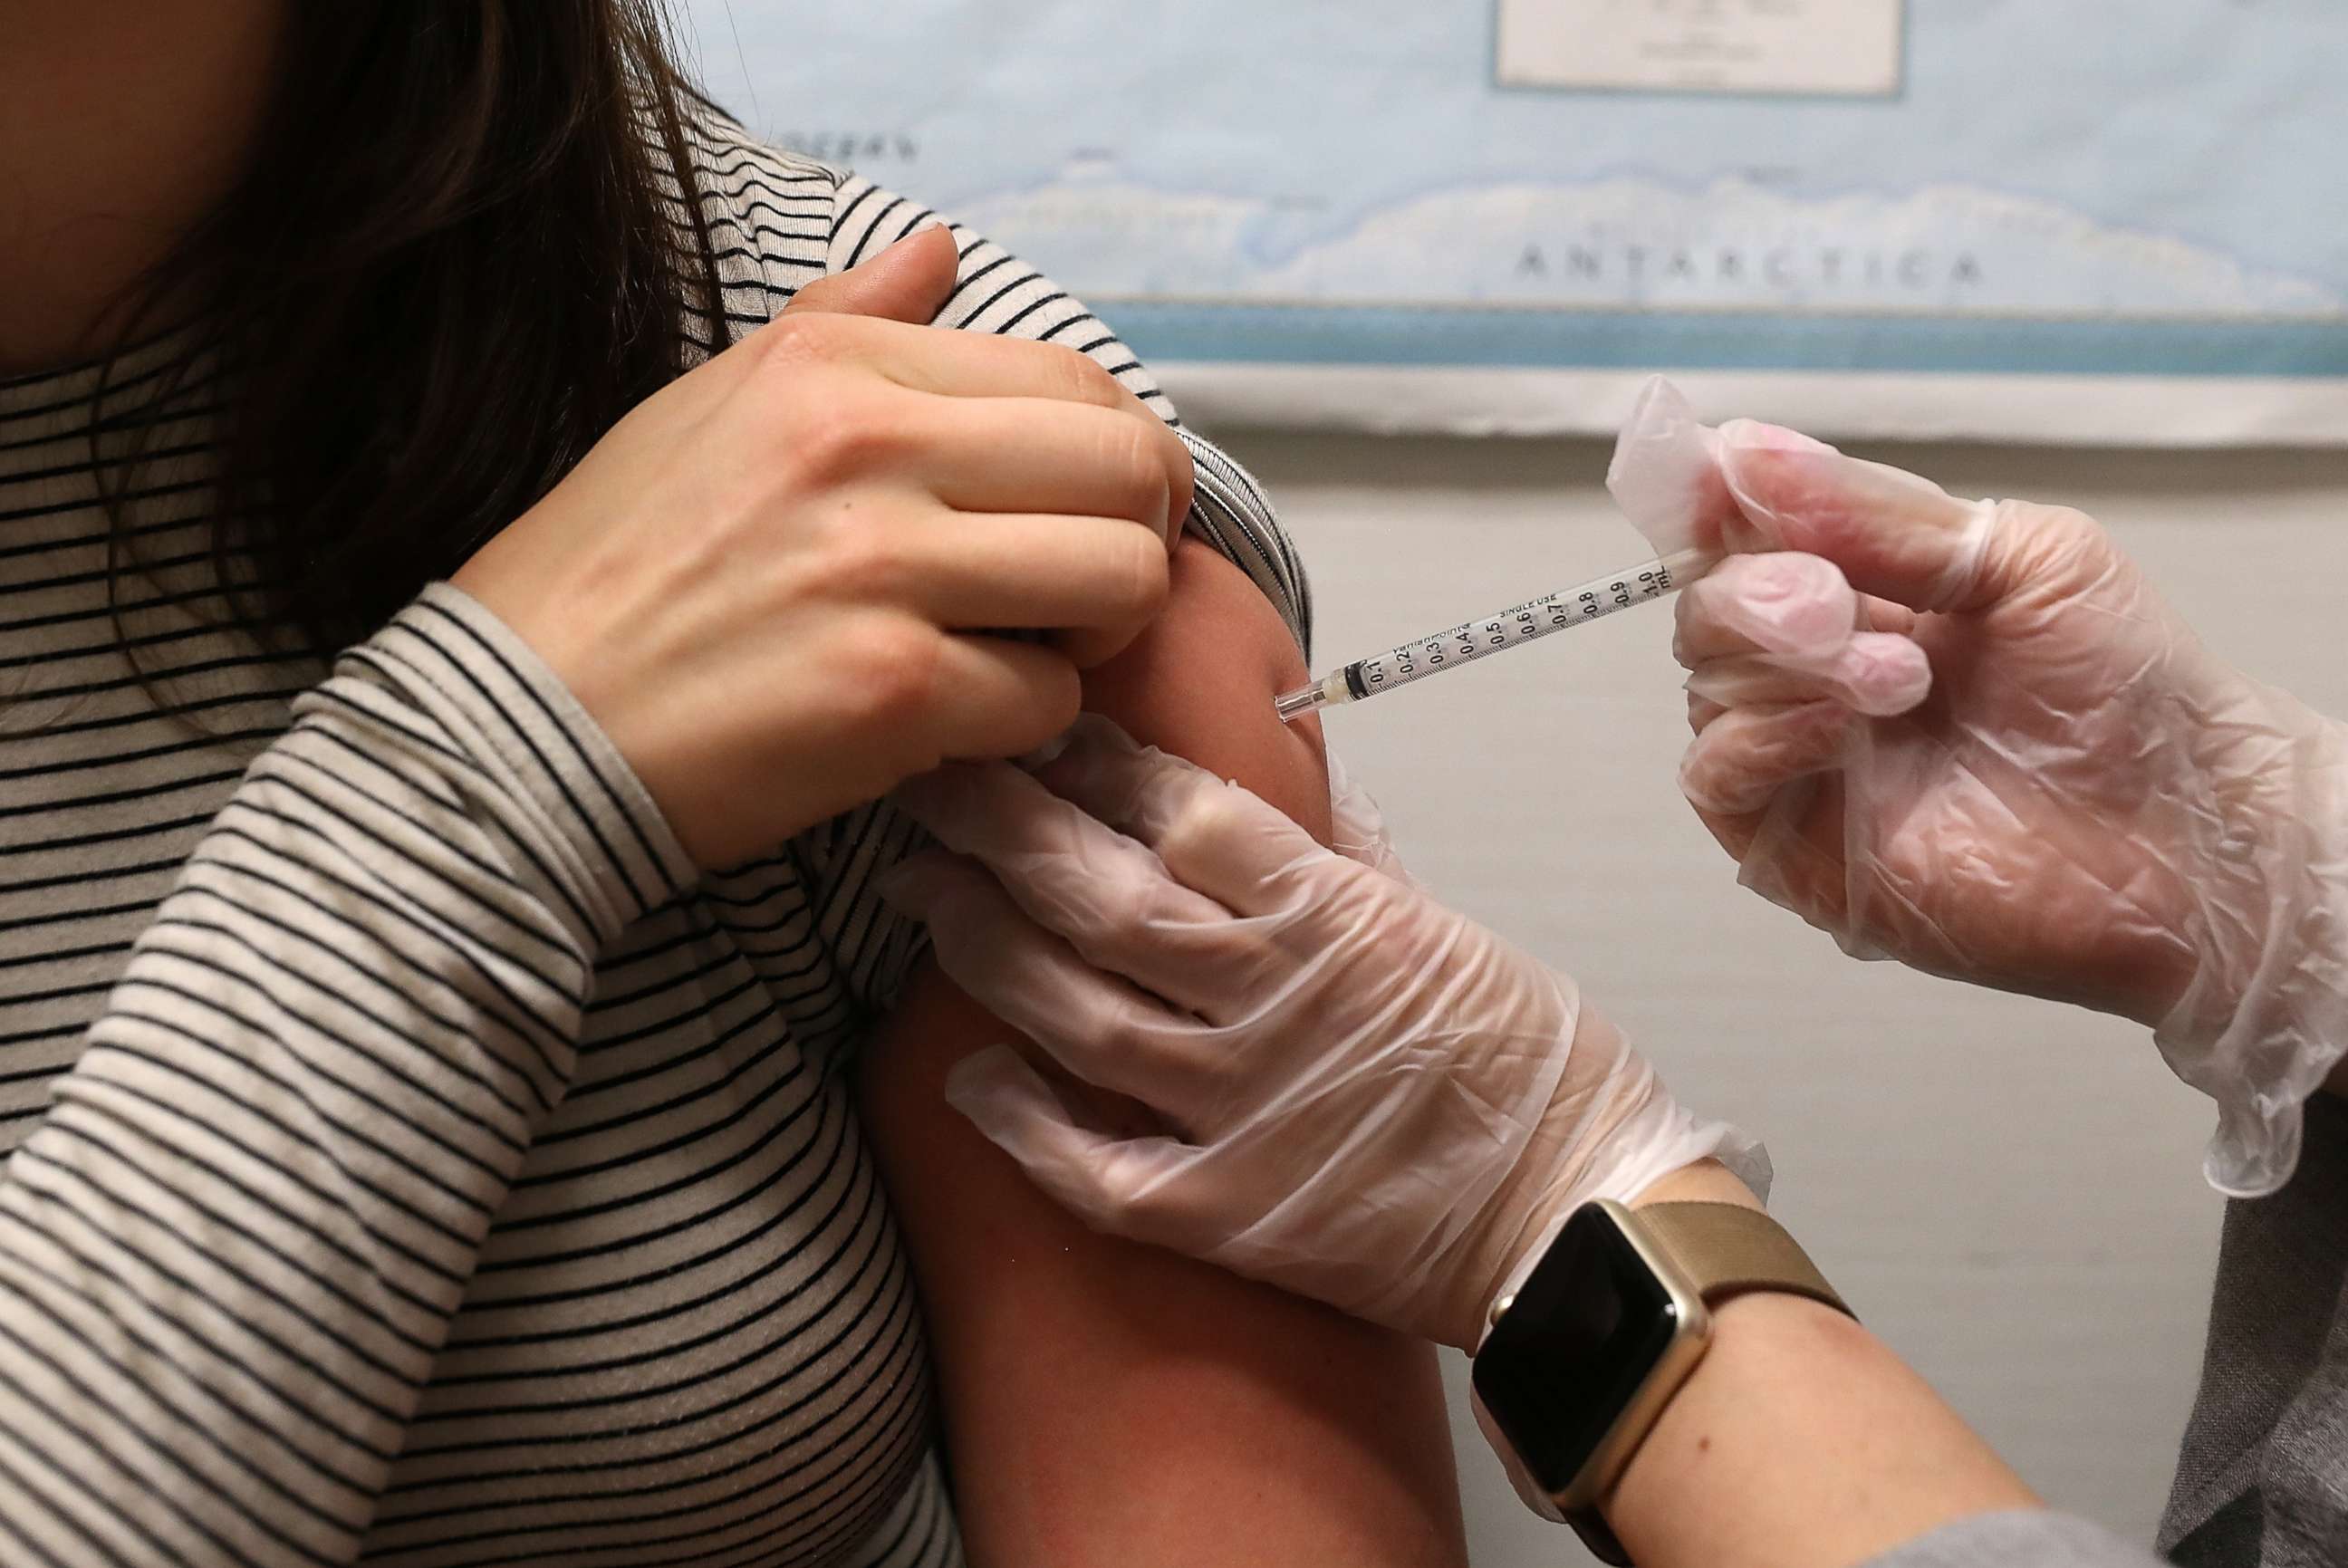 PHOTO: In this Jan. 22, 2018, file photo, a woman receives a flu shot at a Walgreens pharmacy in San Francisco.